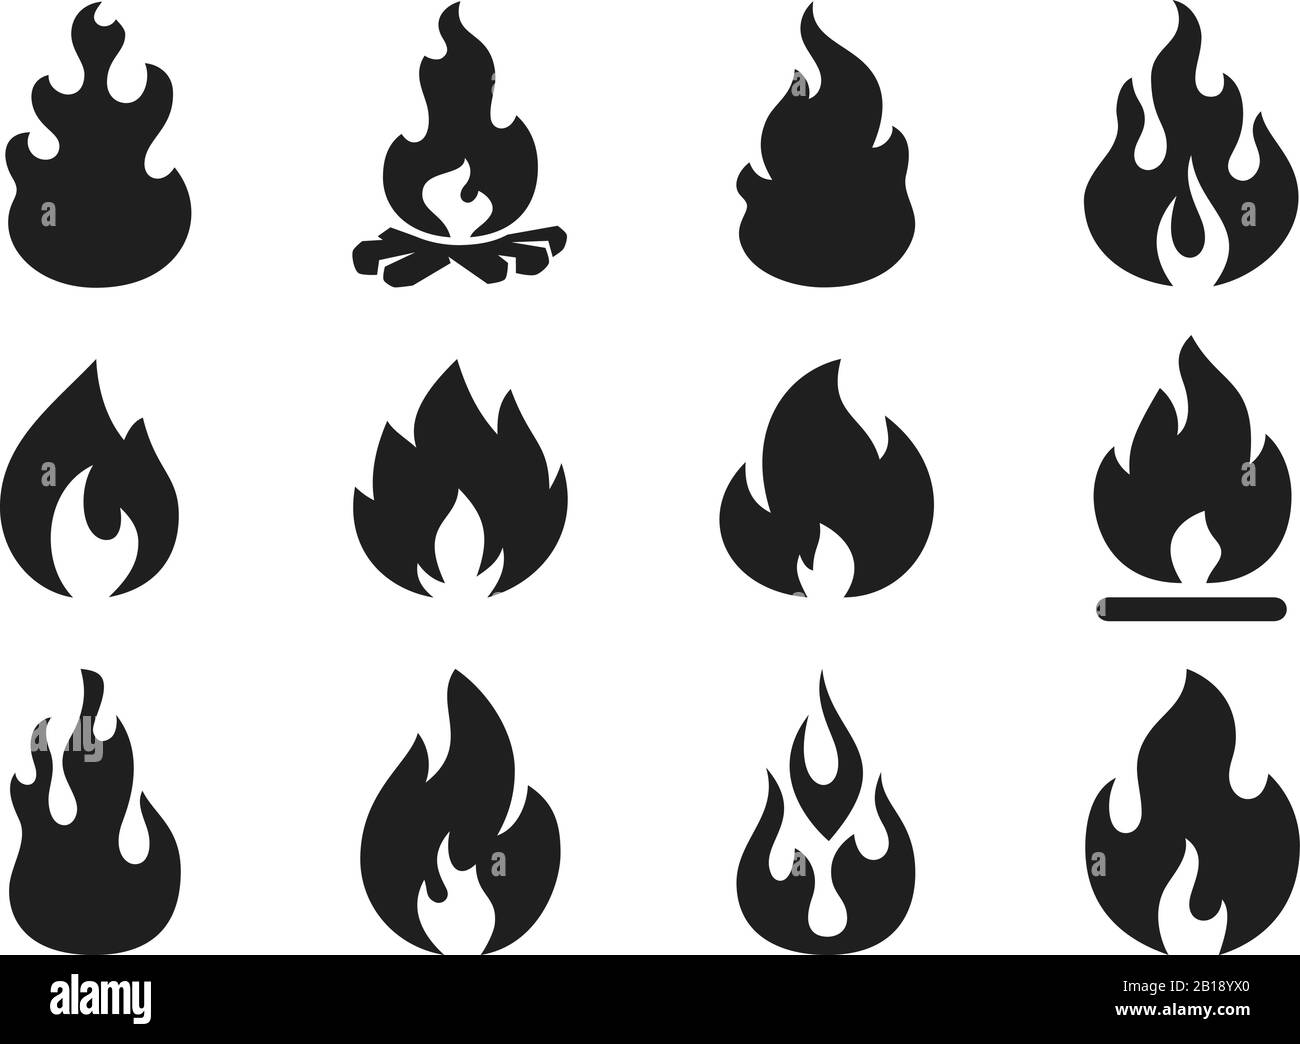 Fire flames silhouette. Flaming campfire, hot inferno flame shape. Simple vector illustration icons set Stock Vector